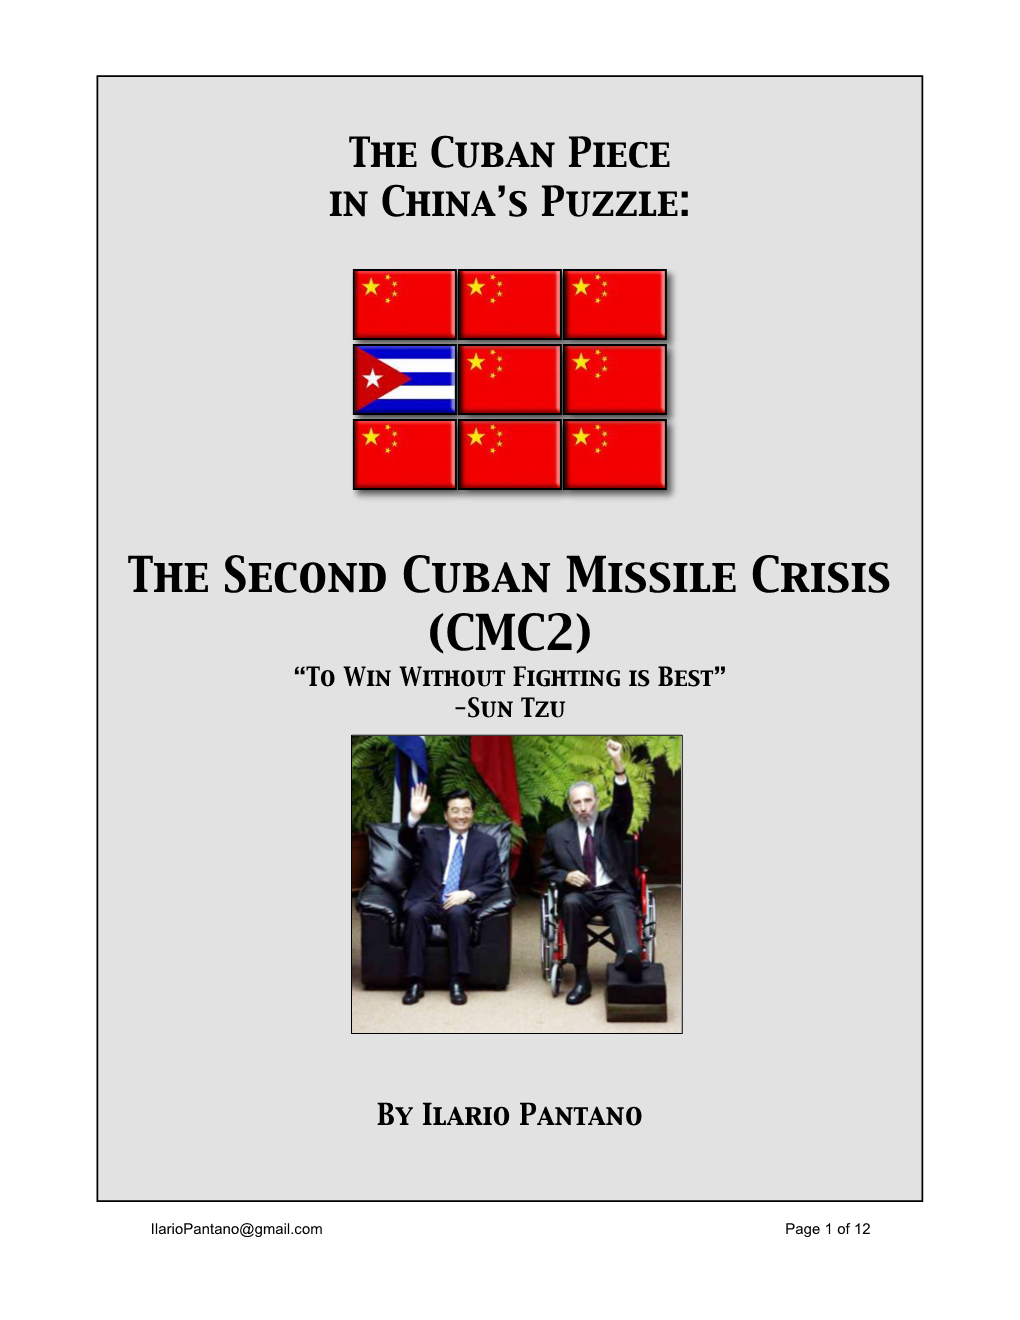 The Second Cuban Missile Crisis December 4,2009